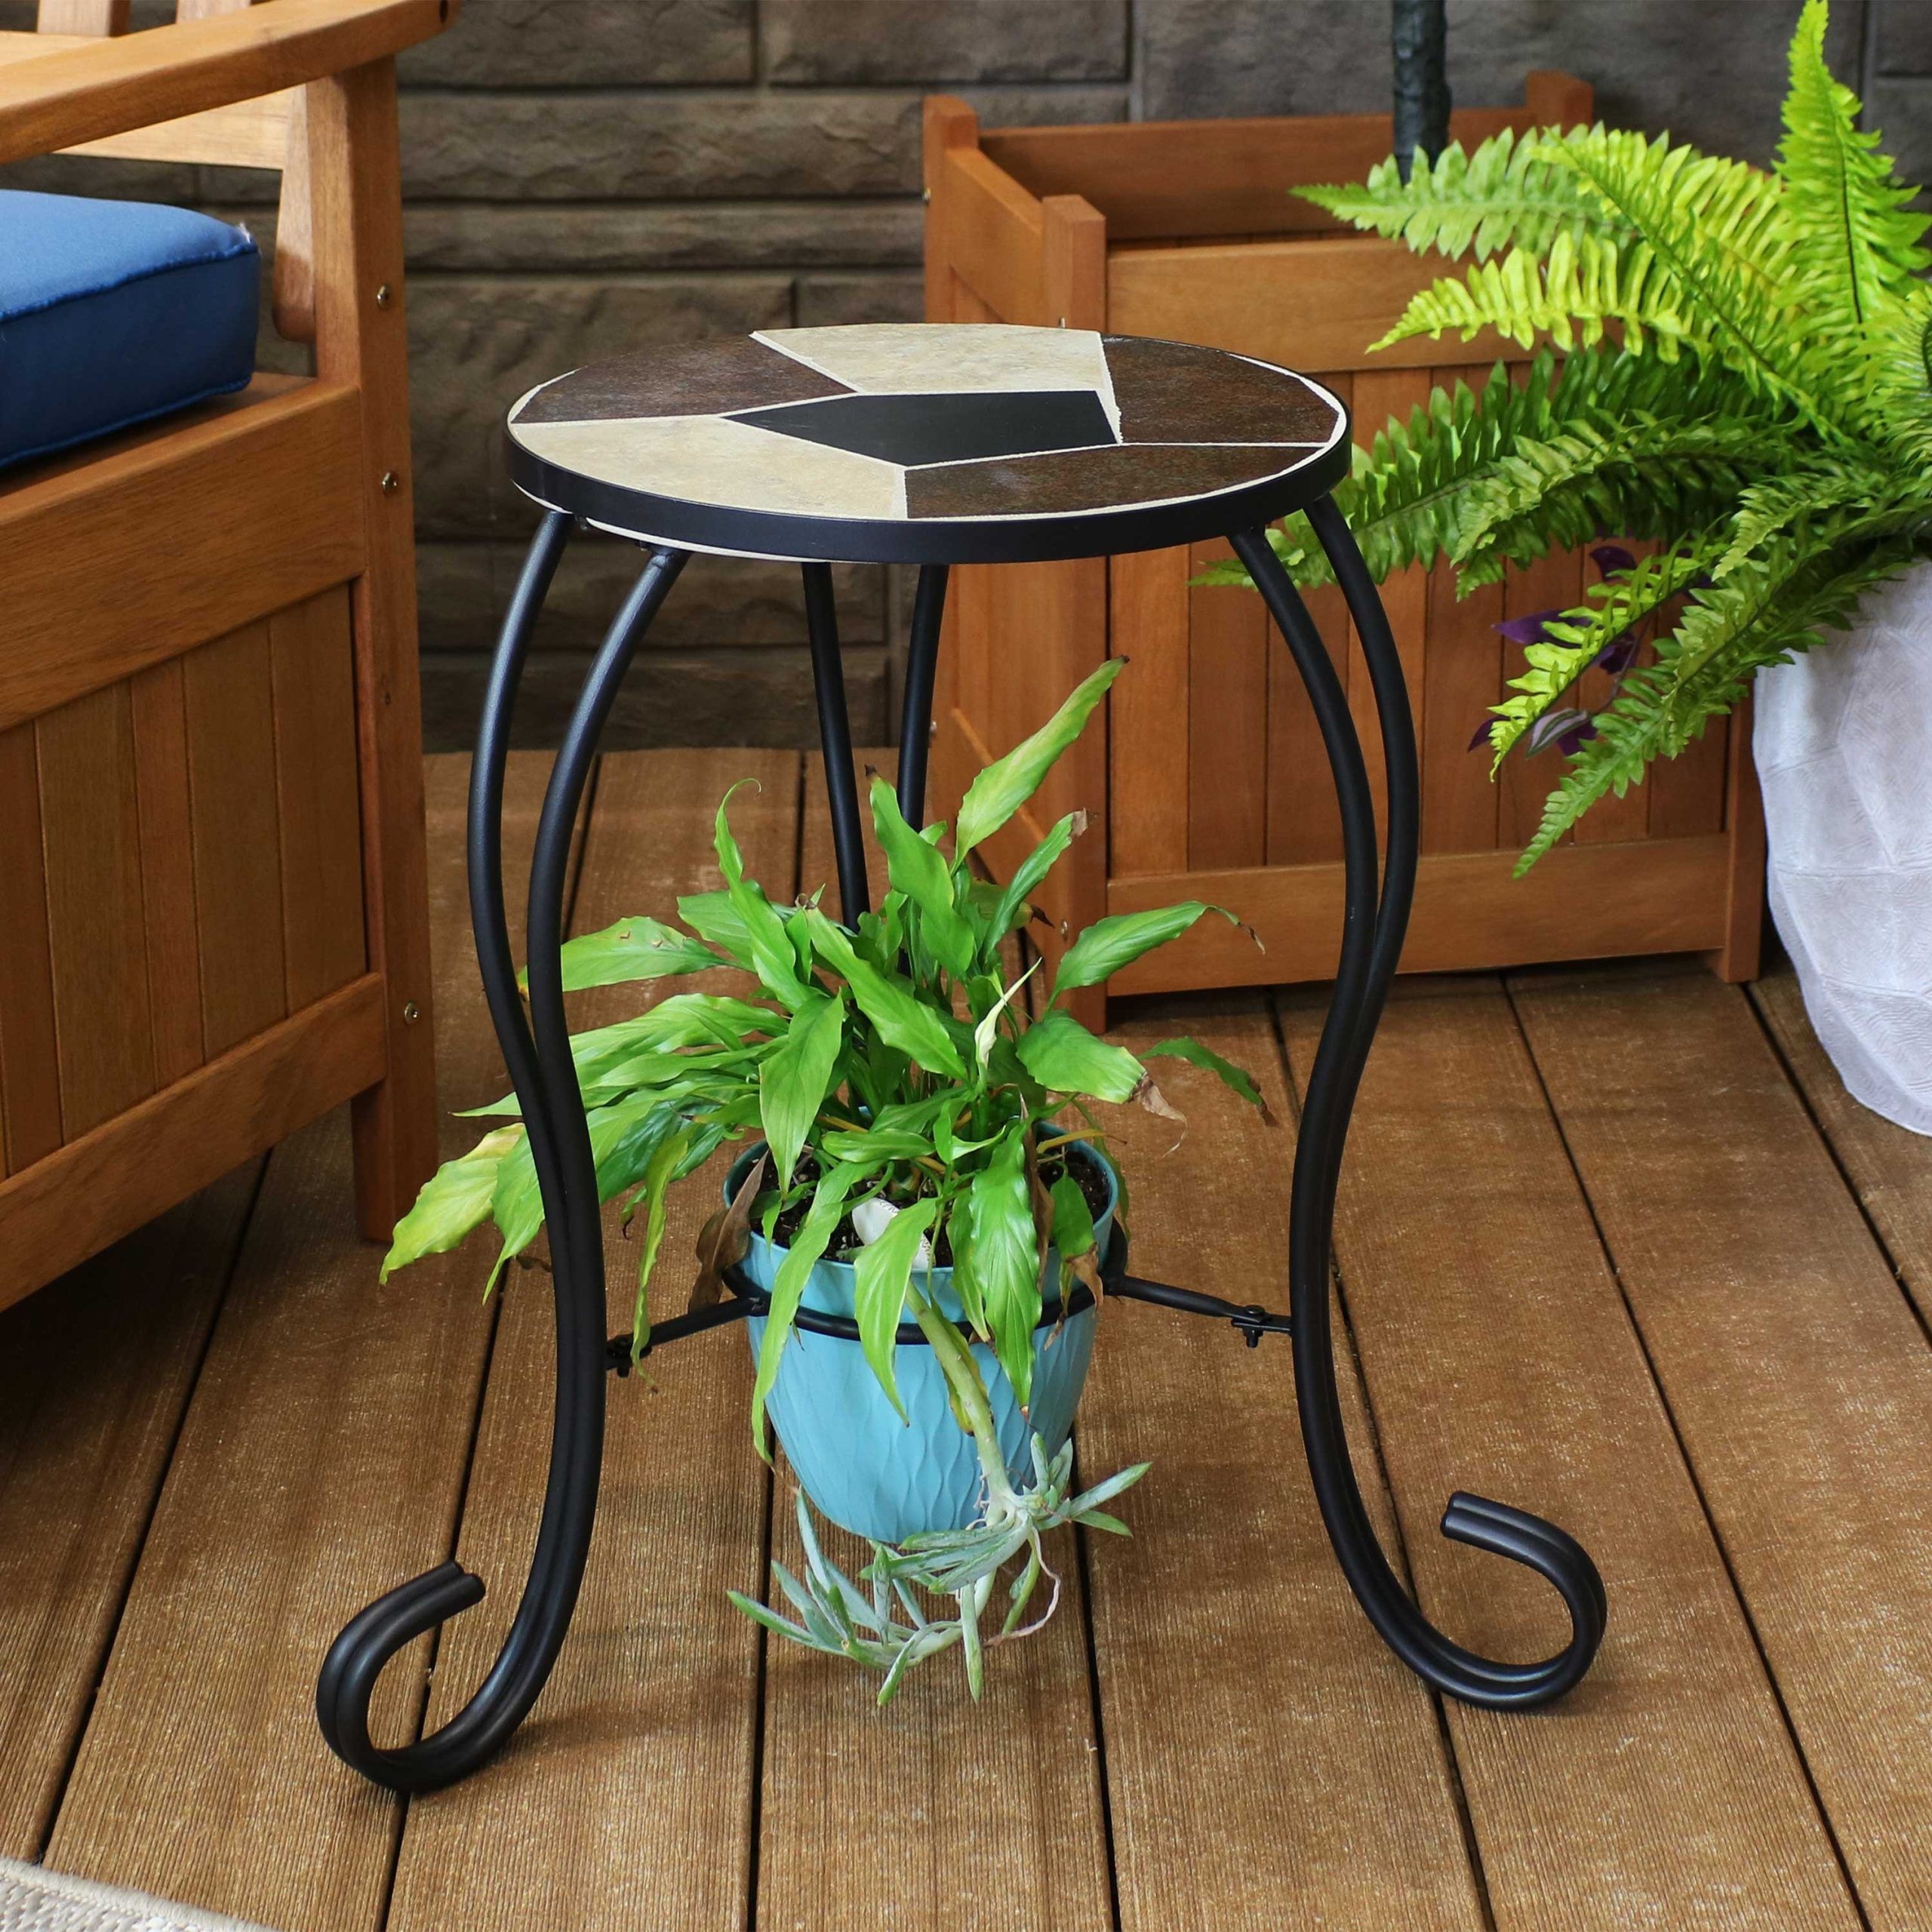 Sunnydaze 12 Inch Mosaic Ceramic Tile Side Table/ Plant Stand – Steel Frame  – Overstock – 31954096 With Plant Stands With Side Table (Photo 10 of 15)